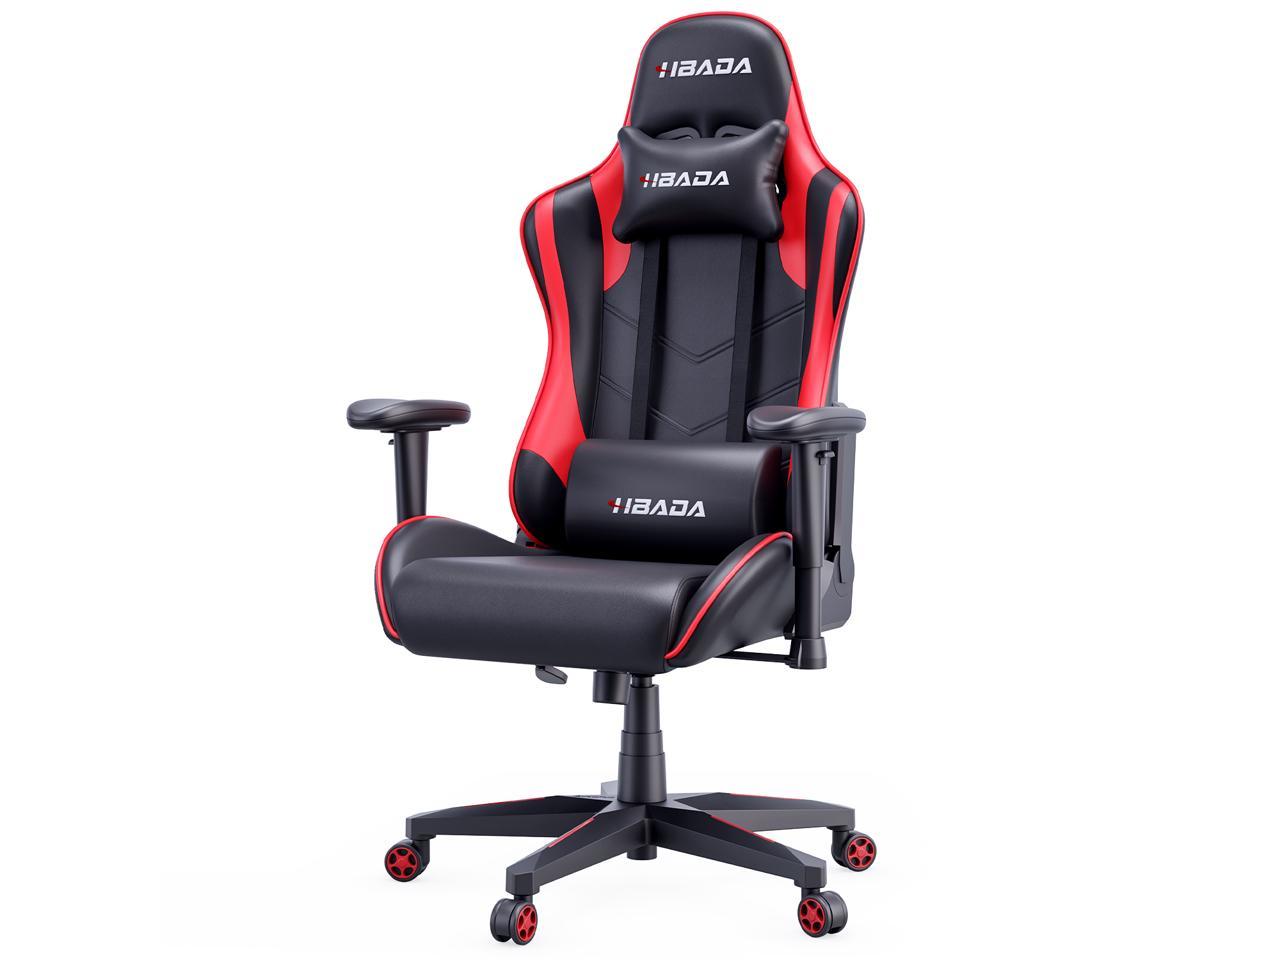 Hbada Gaming Chair Racing Style Ergonomic High Back Computer Chair with Height Adjustment, Headrest, and Lumbar Support E-Sports Swivel Chair, Red